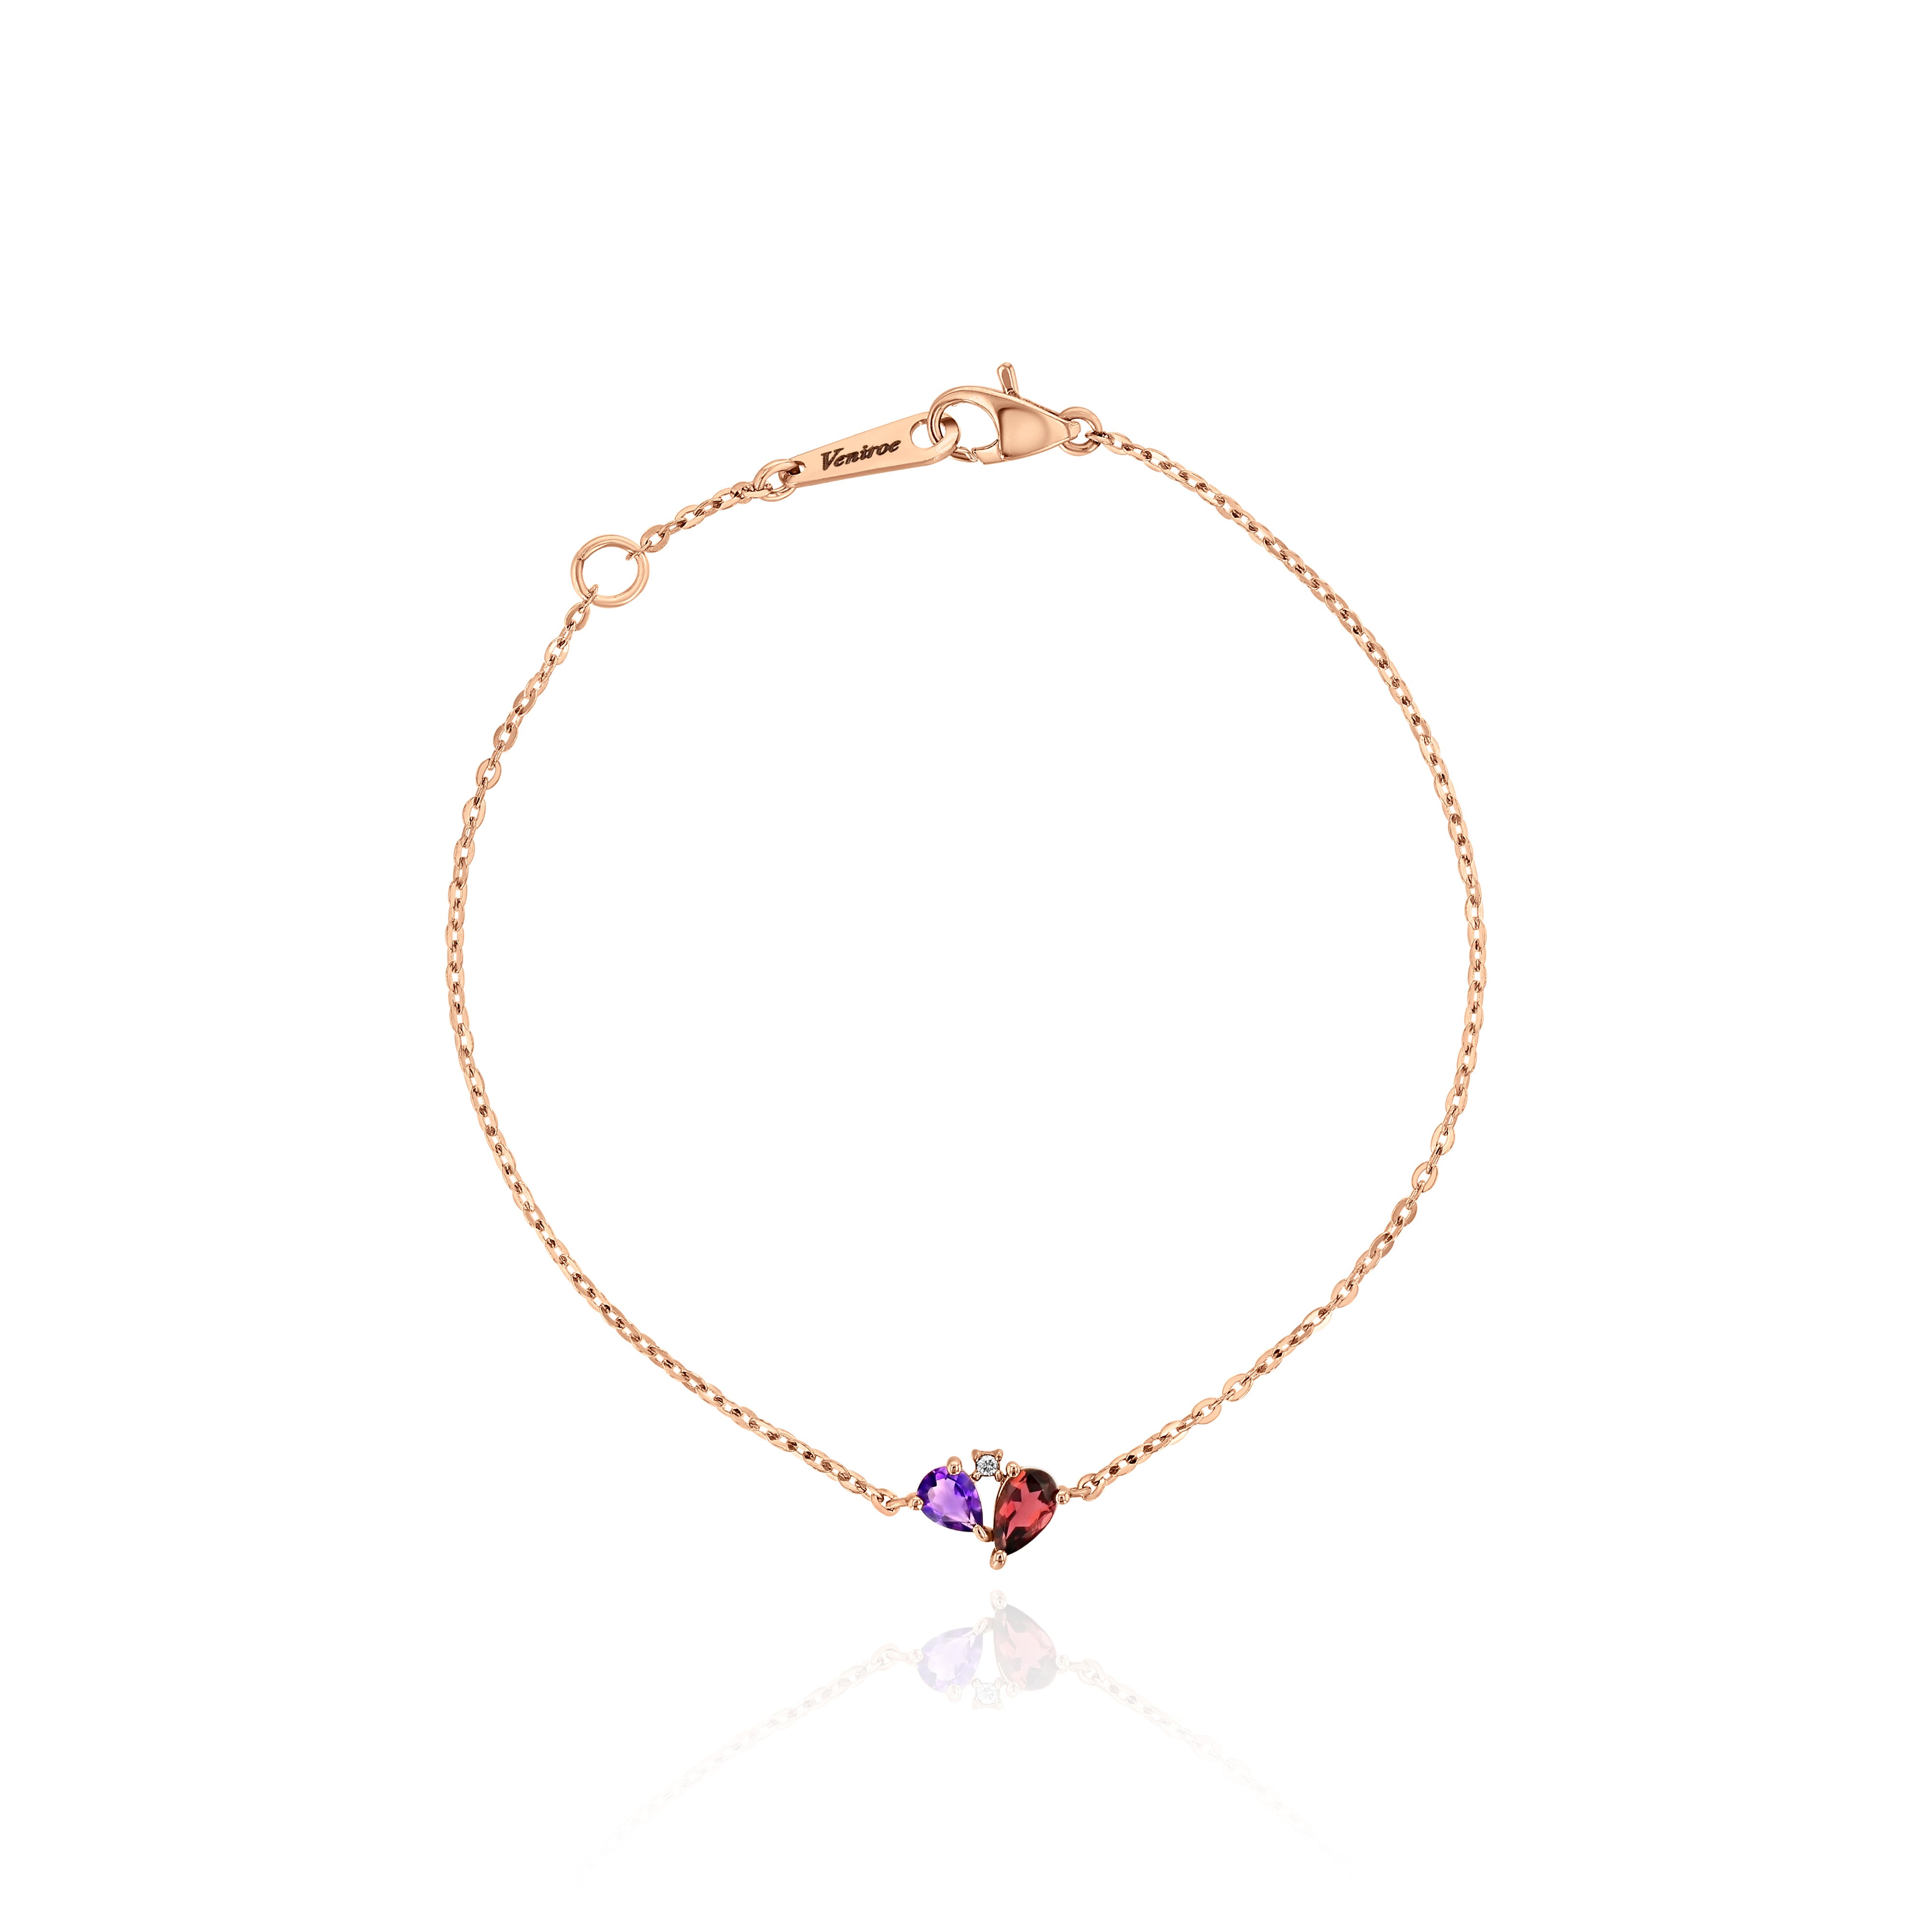 Rose Gold Bracelet with pear shaped Rubellite and Amethyst, and a round Diamond, Small